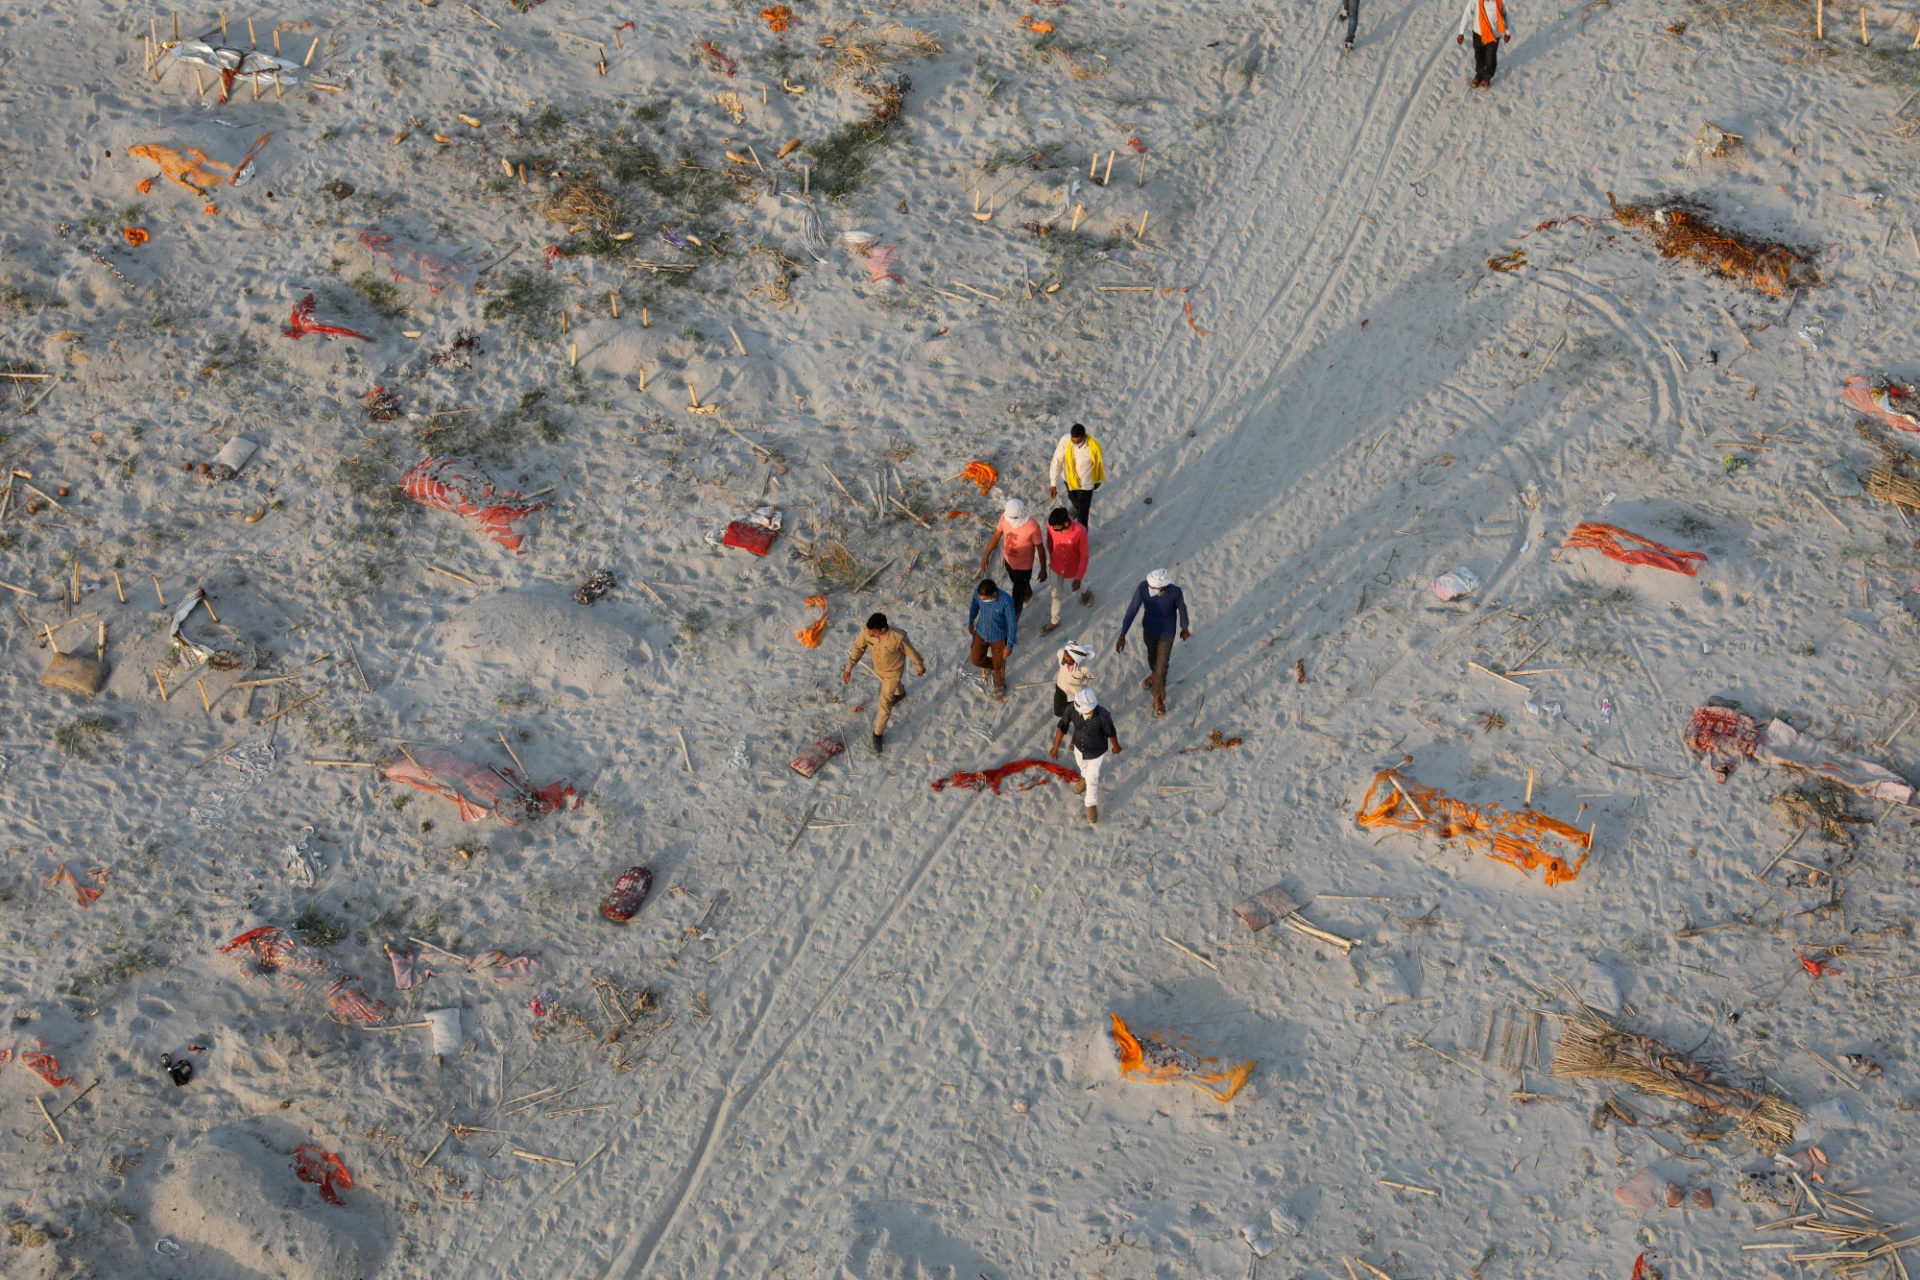 Bodies of suspected Covid-19 victims are seen in shallow graves buried in the sand near a cremation ground on the banks of Ganges River in Prayagraj, India on Saturday.Rajesh Kumar Singh / AP